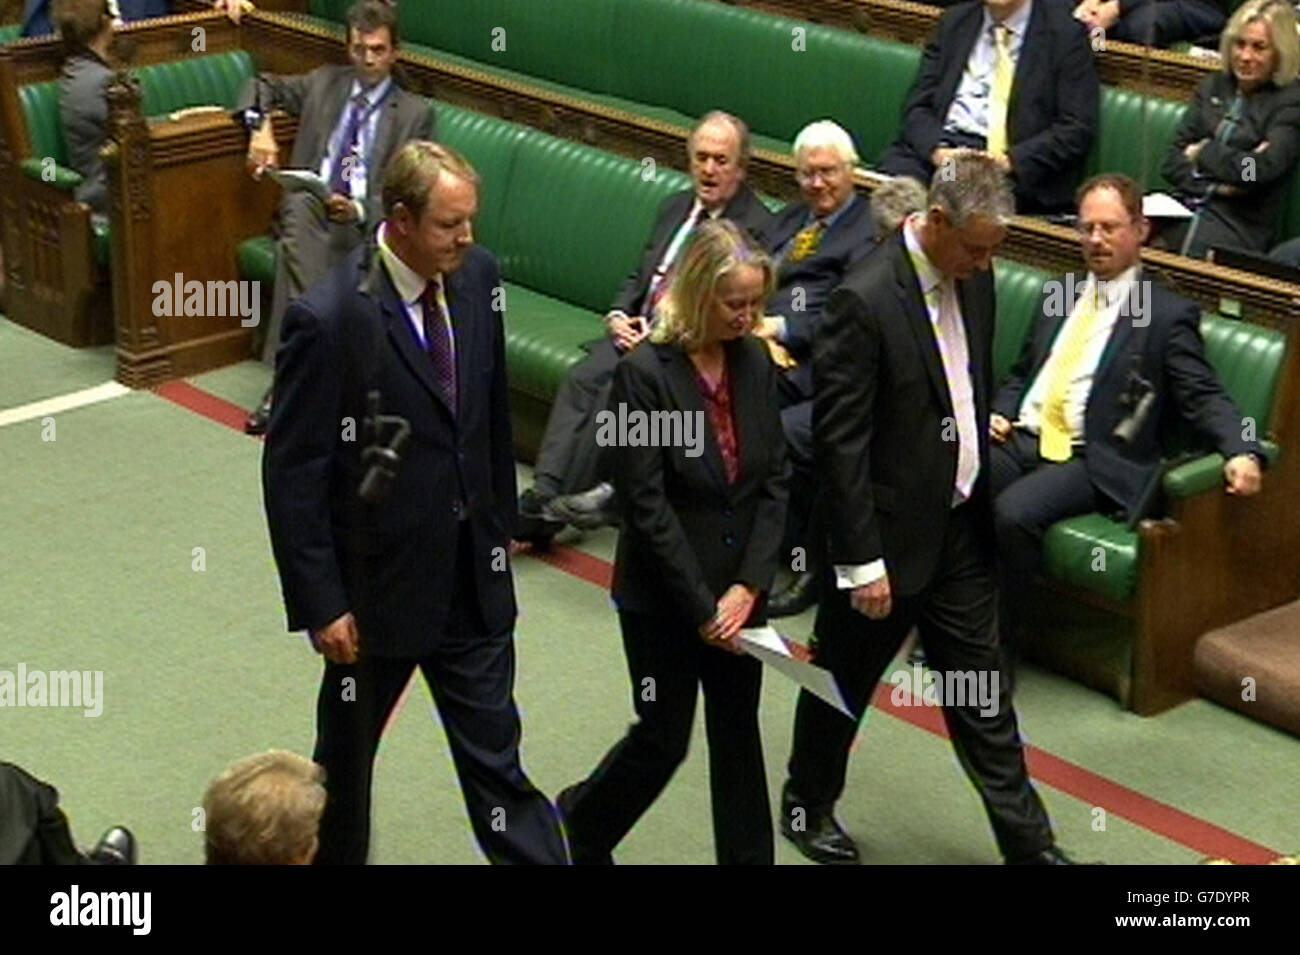 MP for Heywood and Middleton Liz McInnes is welcomed as she takes her seat as MP in the House of Commons. Stock Photo